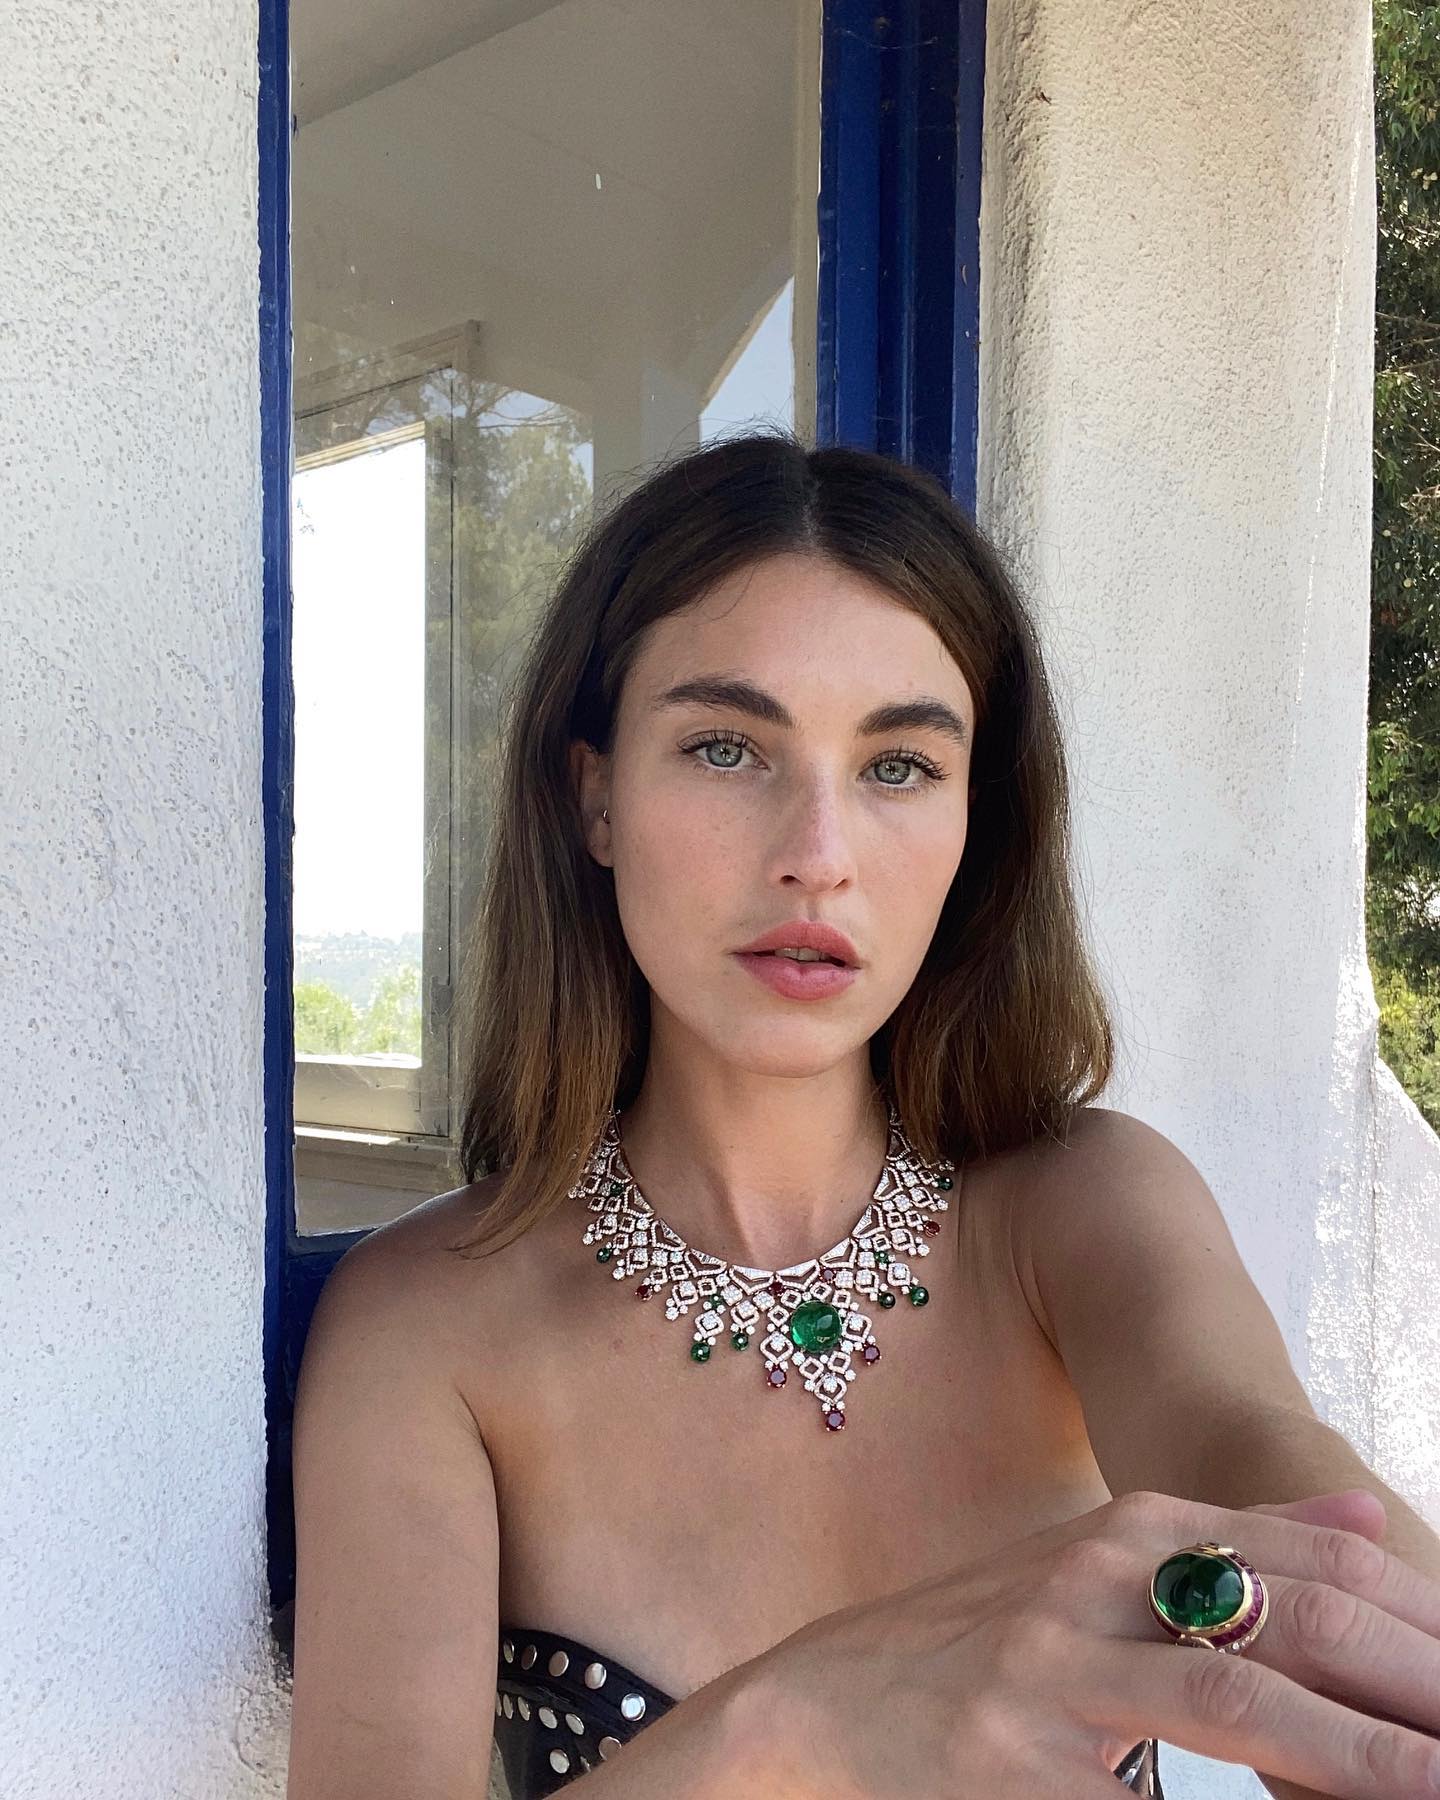 Rainey Qualley Showing Off the Jewels! - Photo 1